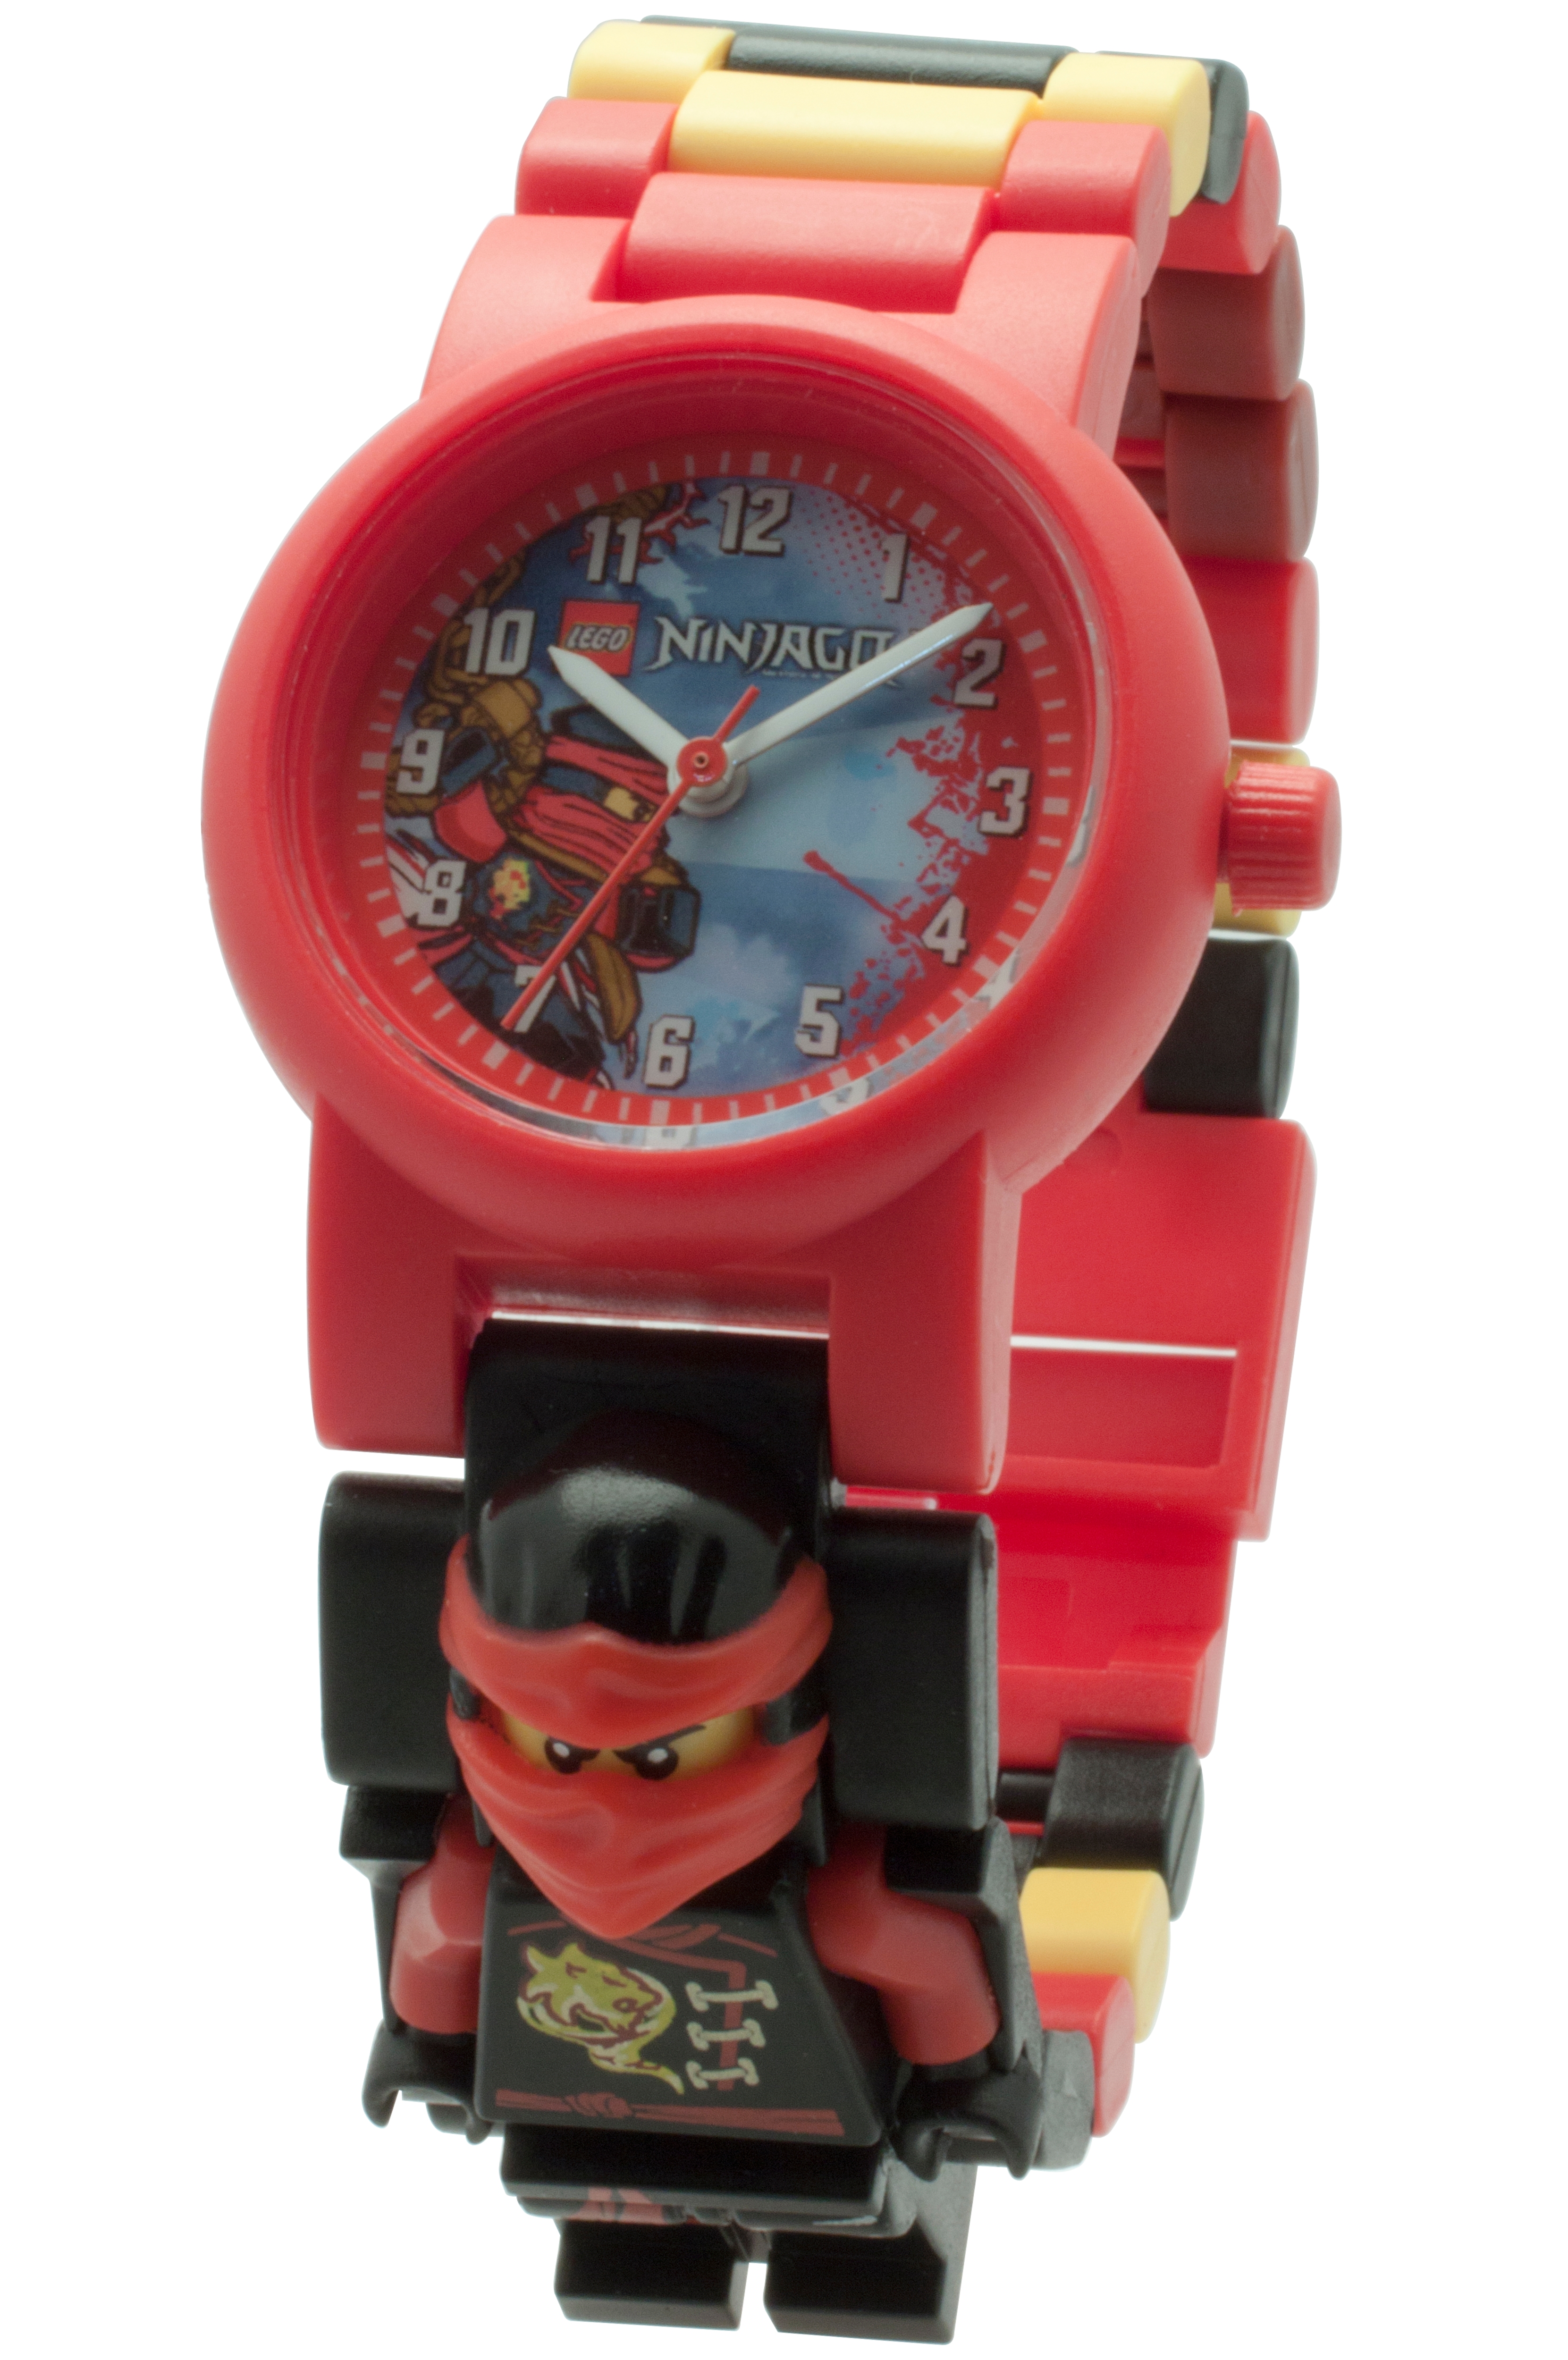 Lego Chronograph Watch (adult) - Imagine That Toys